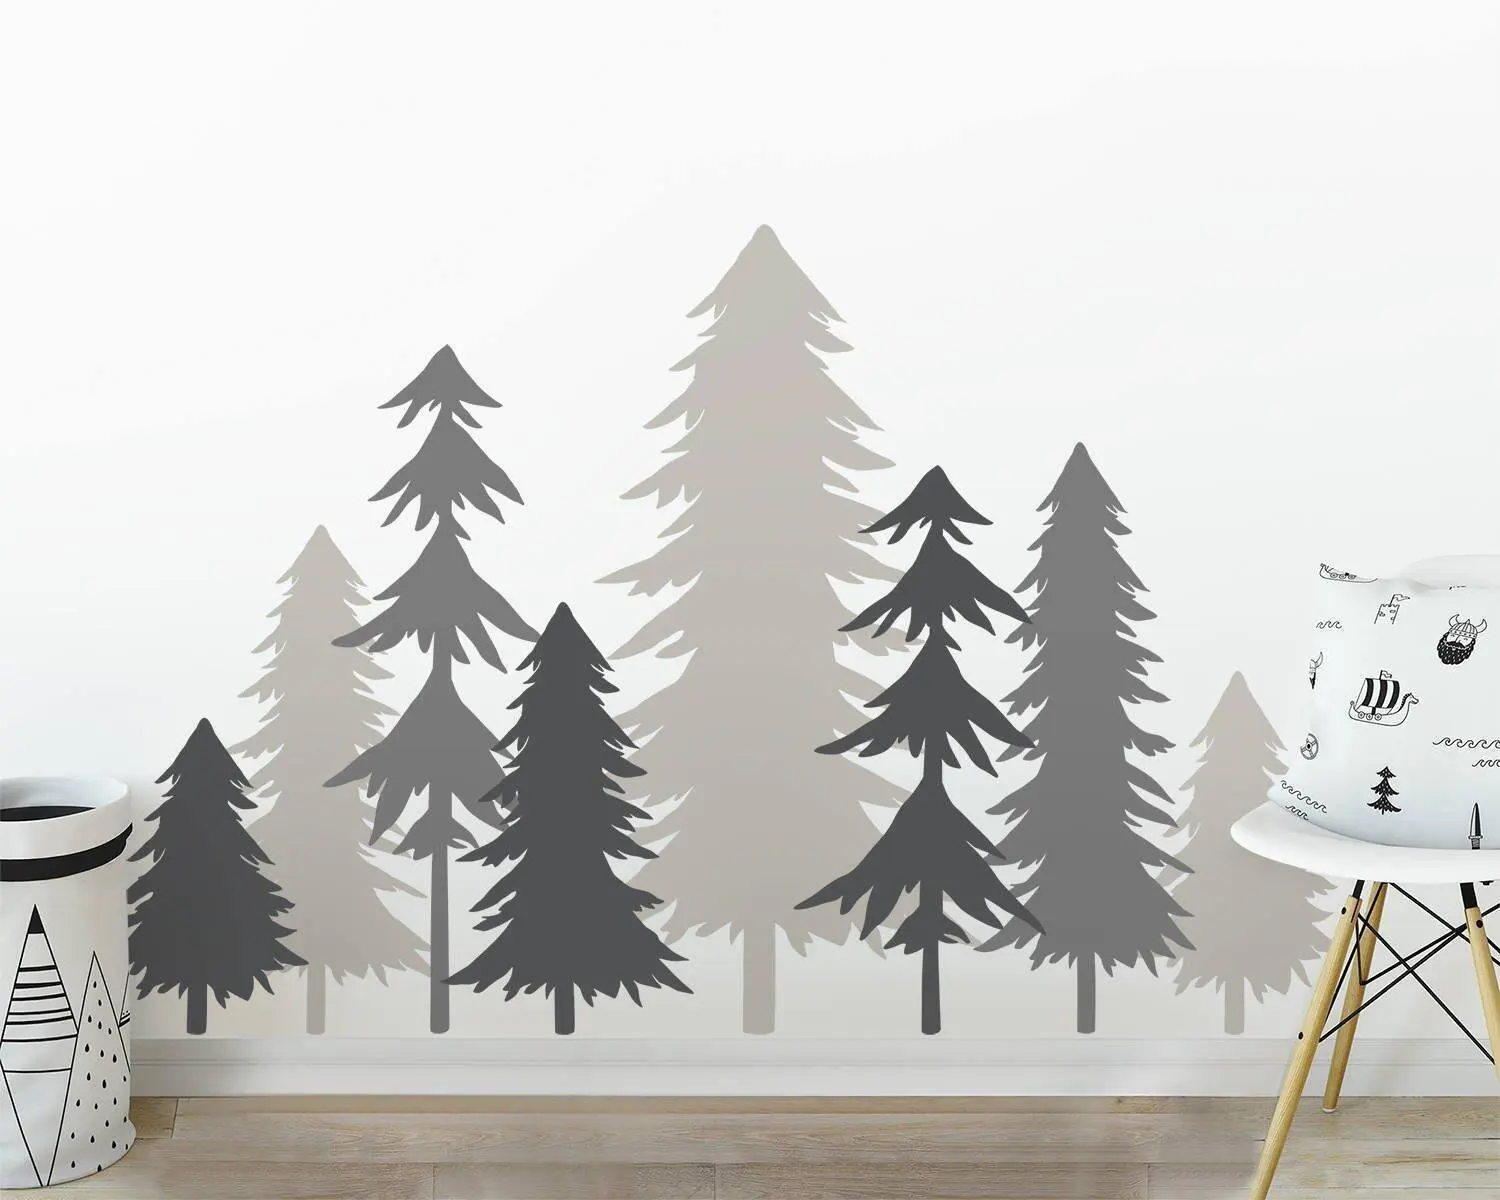 Cheap Forest Tree Wall Decals Find Forest Tree Wall Decals Deals On Line At Alibaba Com - baby decals family tree white decal roblox for nursery pine